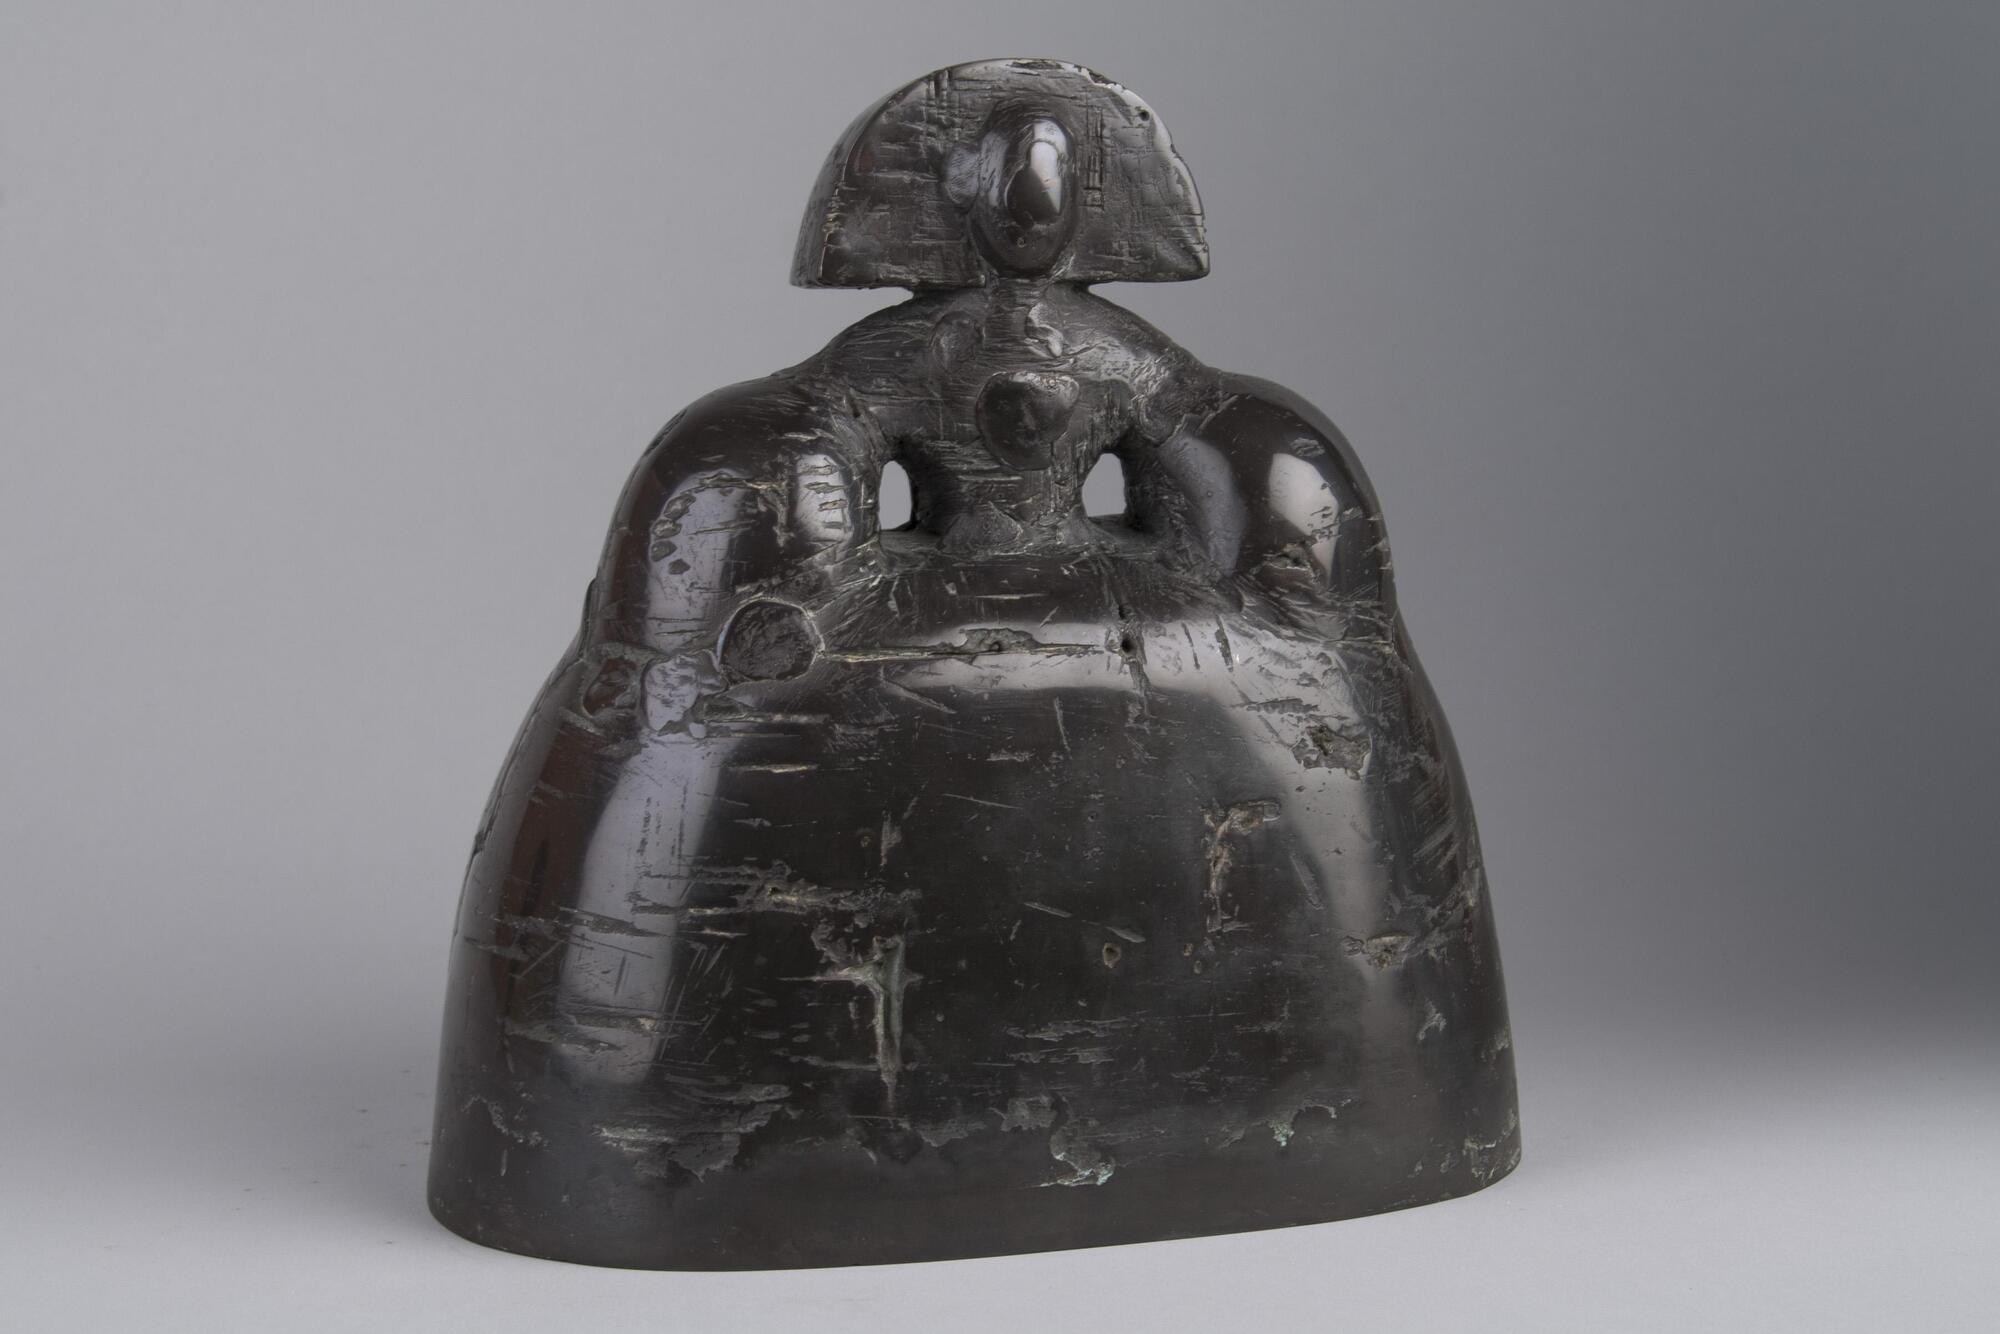 A bronze figure of a girl. The bottom half is a bell shaped skirt white the top half is of a girl wearing a hat that ends at her shoulders.